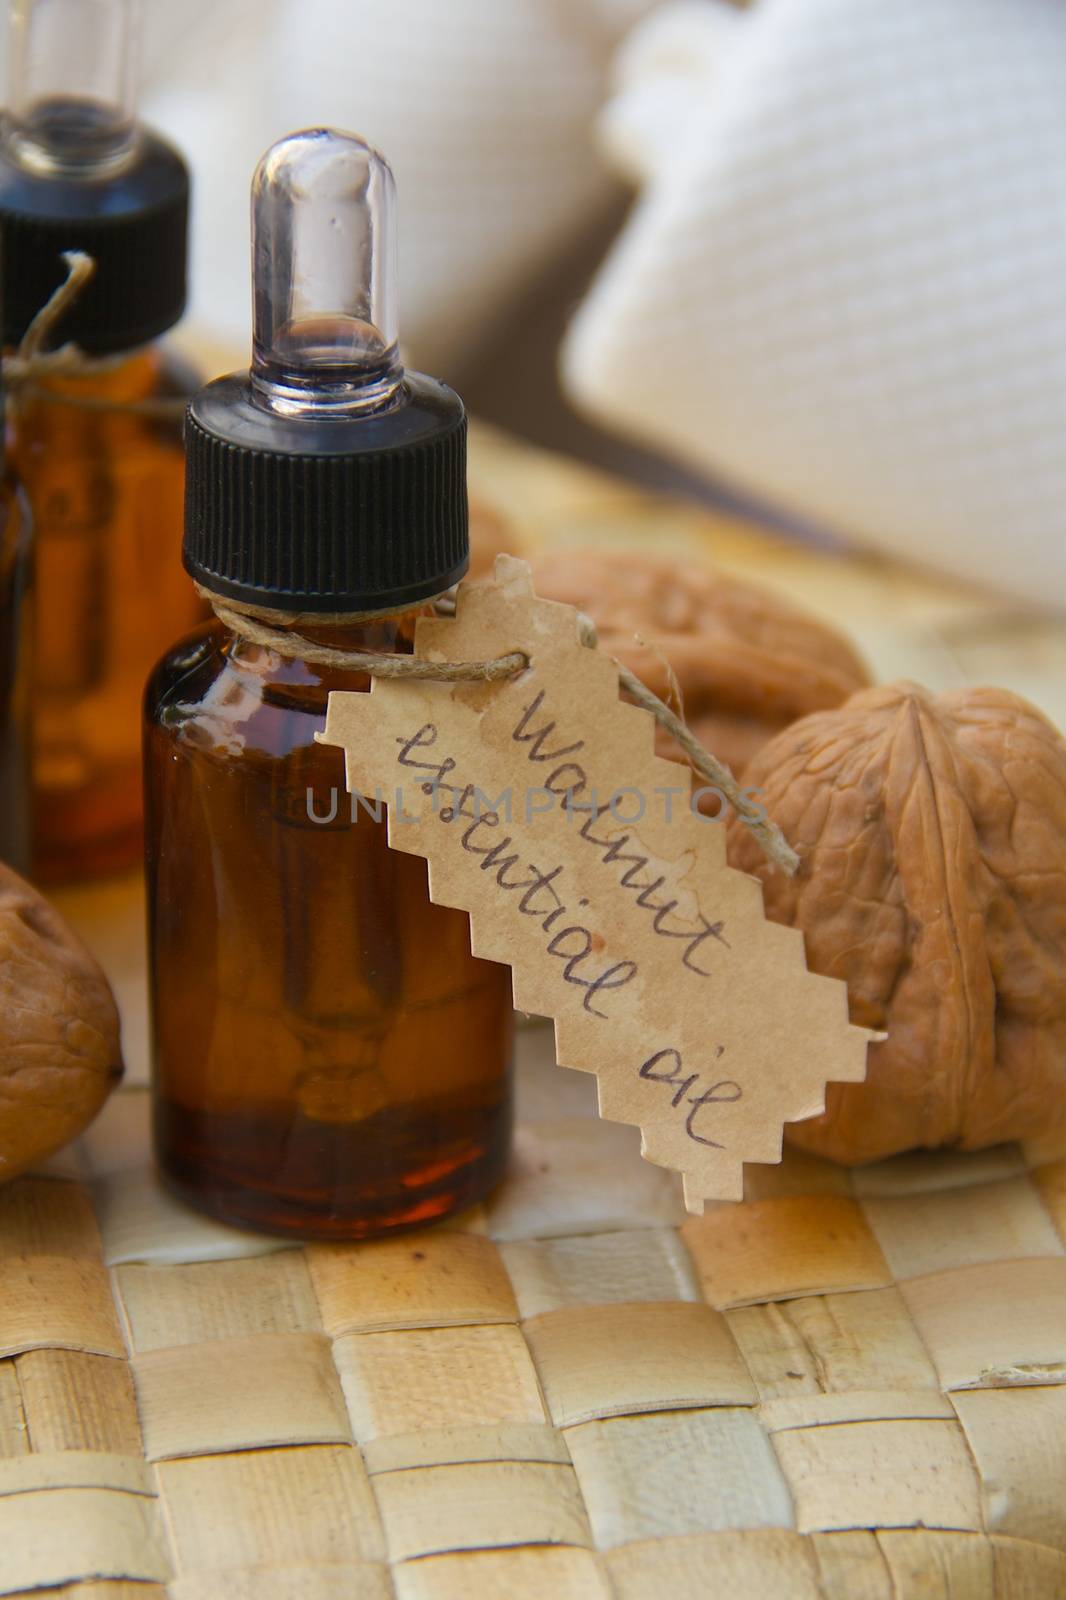 Walnut essential oil by tolikoff_photography